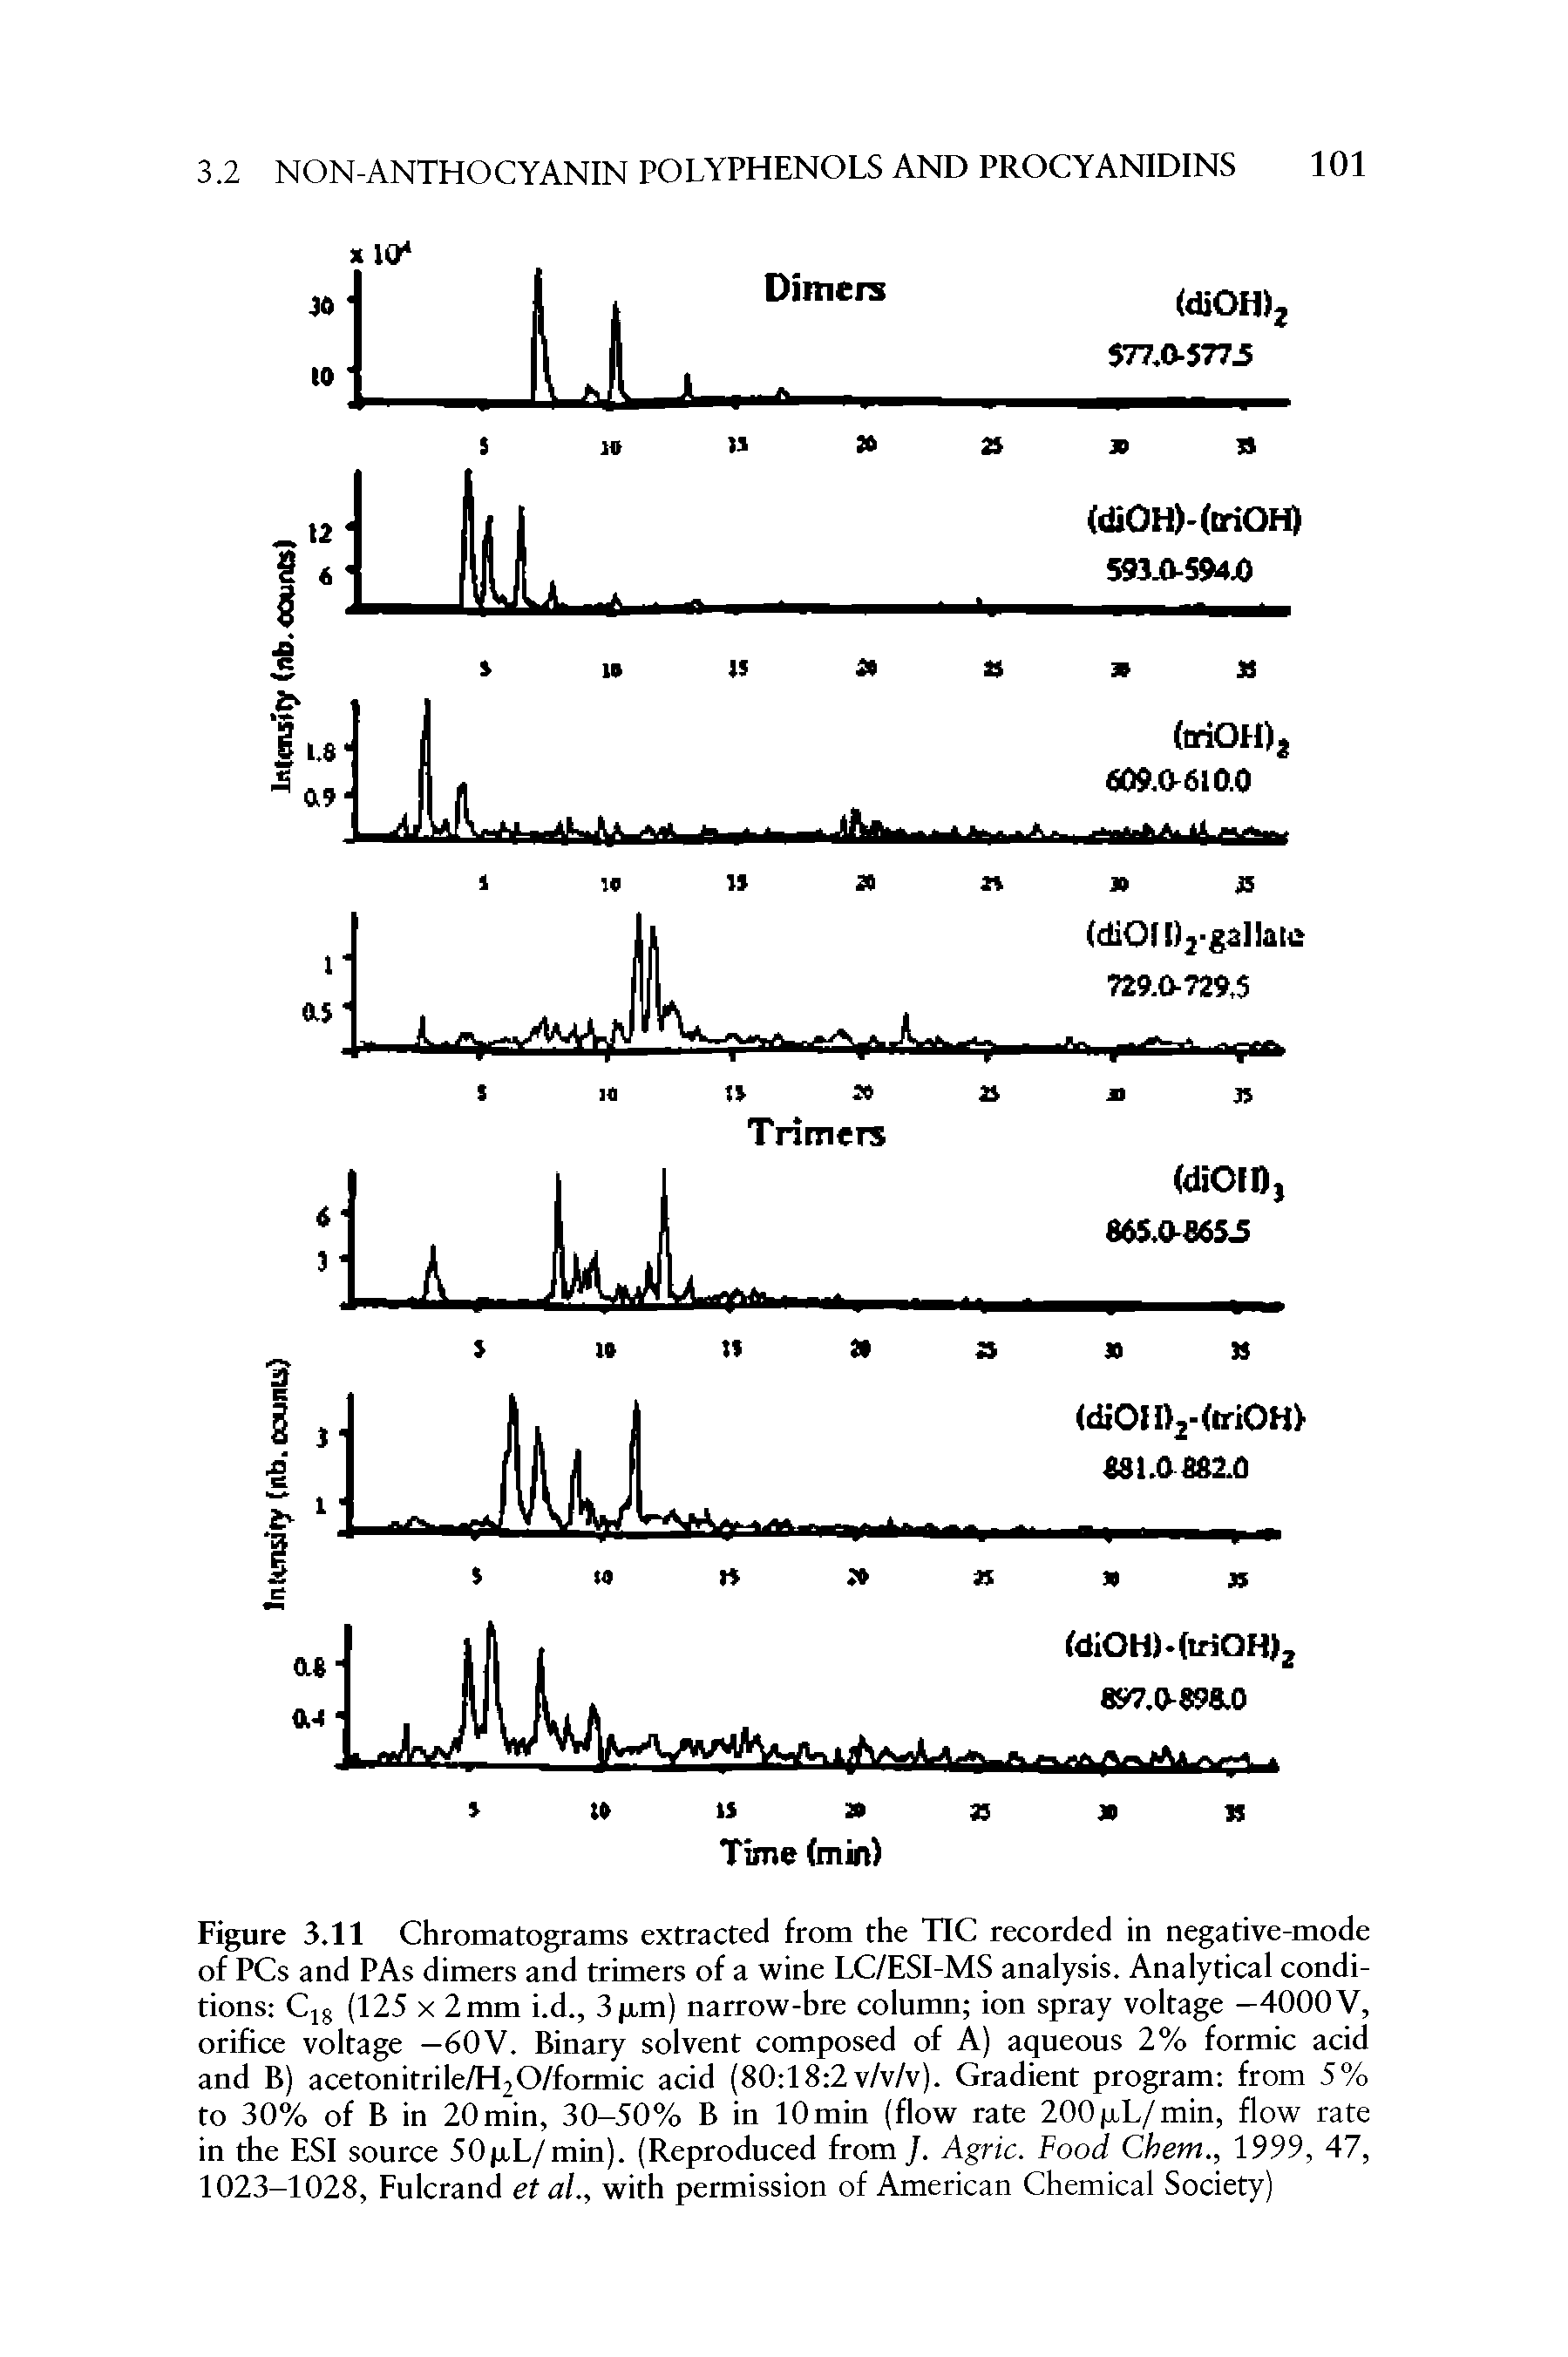 Figure 3.11 Chromatograms extracted from the TIC recorded in negative-mode of PCs and PAs dimers and trimers of a wine LC/ESI-MS analysis. Analytical conditions C18 (125 x 2 mm i.d., 3(r,m) narrow-bre column ion spray voltage —4000 V, orifice voltage —60 V. Binary solvent composed of A) aqueous 2% formic acid and B) acetonitrile/H20/formic acid (80 18 2v/v/v). Gradient program from 5% to 30% of B in 20min, 30-50% B in lOmin (flow rate 200p.L/min, flow rate in the ESI source 50p,L/min). (Reproduced from ]. Agric. Food (. hem., 1999, 47, 1023-1028, Fulcrand et al., with permission of American Chemical Society)...